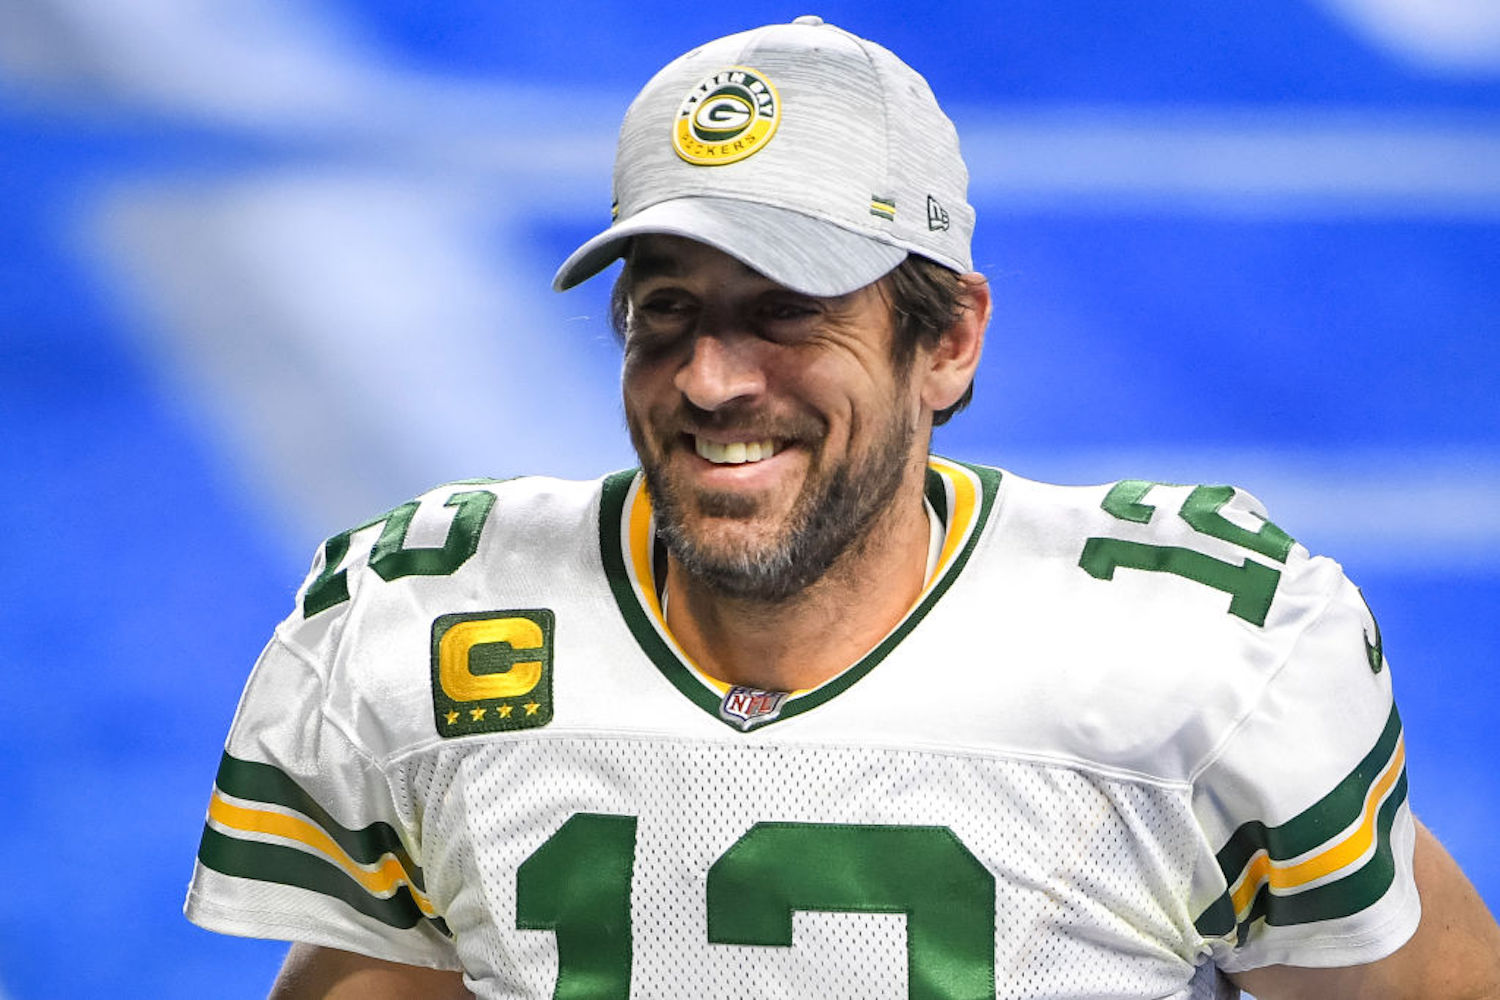 Packers QB Aaron Rodgers recently teamed up with Dave Portnoy and Barstool Sports to send a $500,000 lifeline to small businesses.